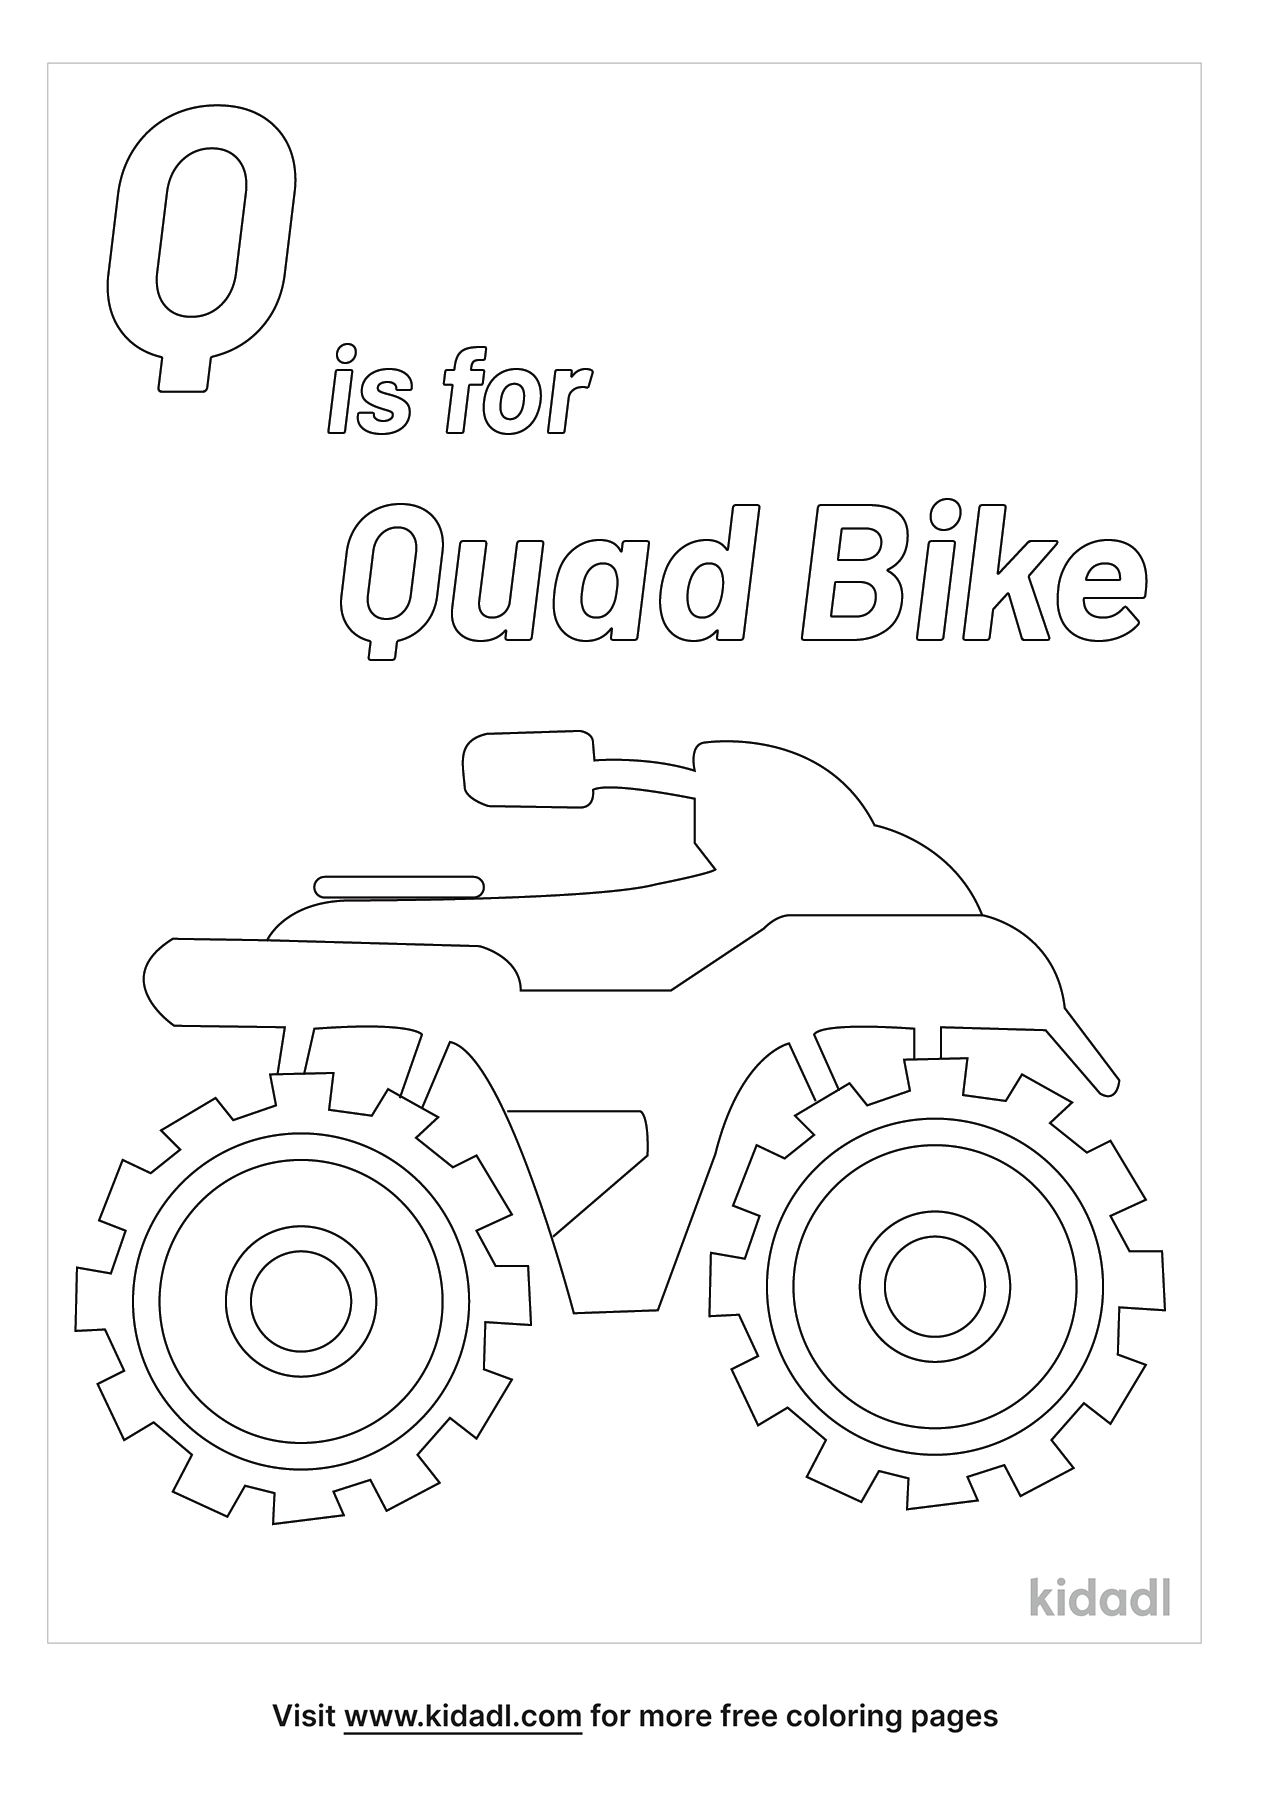 Q Is For Quad Bike Coloring Page | Free Letters Coloring Page | Kidadl